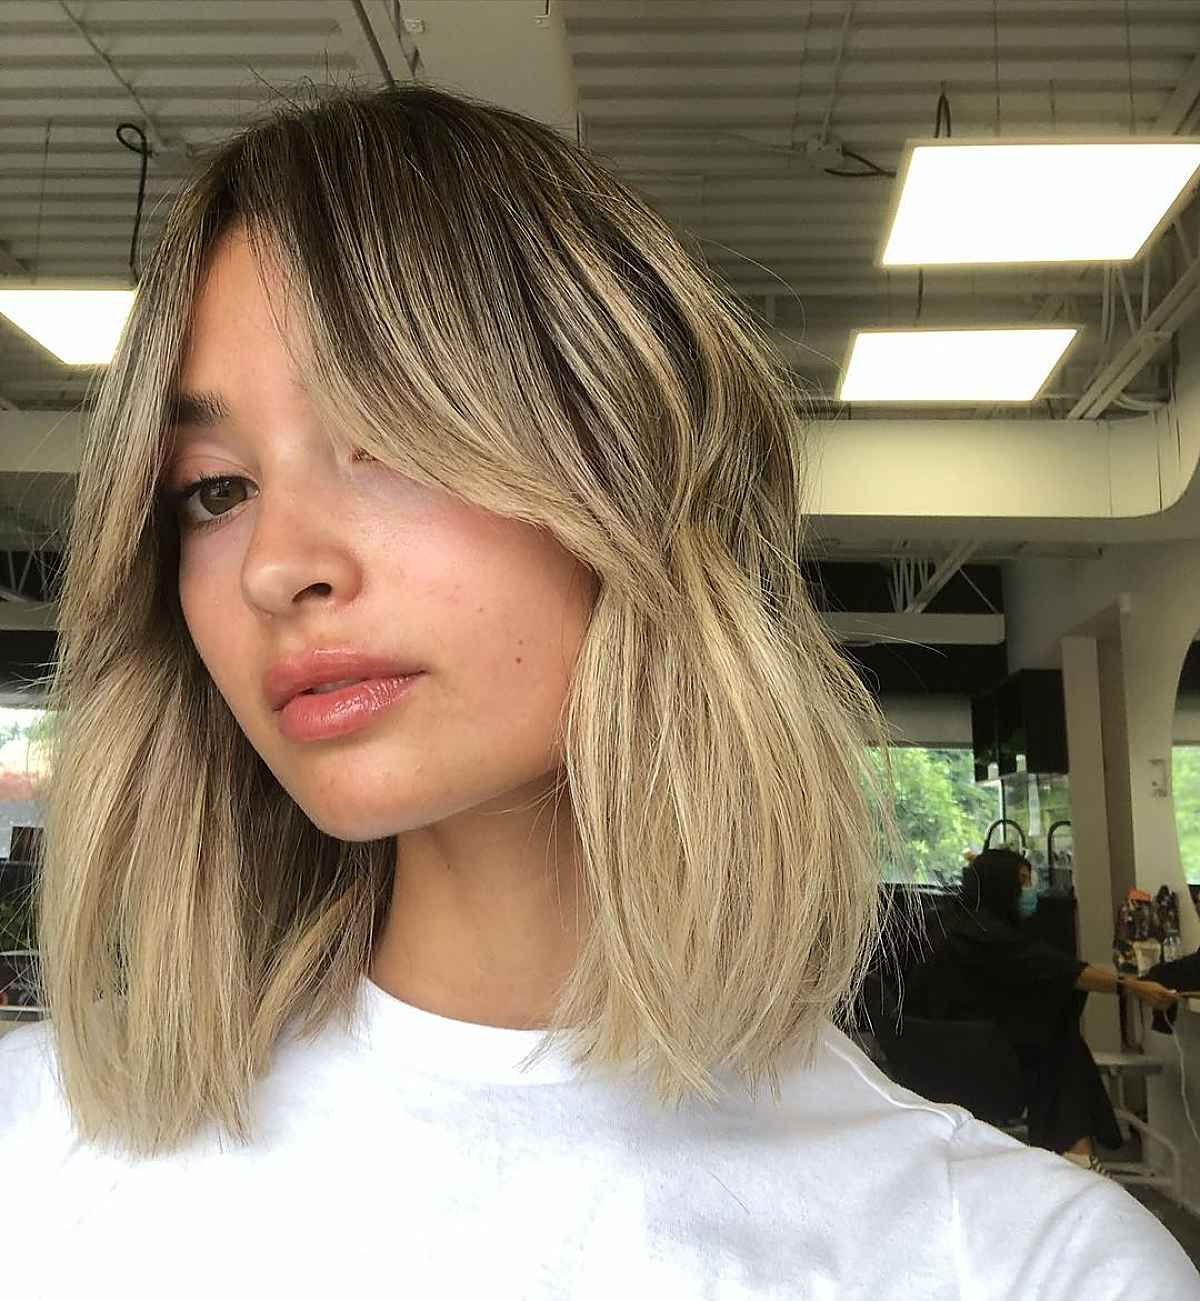 28 Best Ways To Pair A Long Bob With Curtain Bangs Regarding Recent Straight Blunt Haircut With Long Curtain Bangs (Gallery 2 of 20)